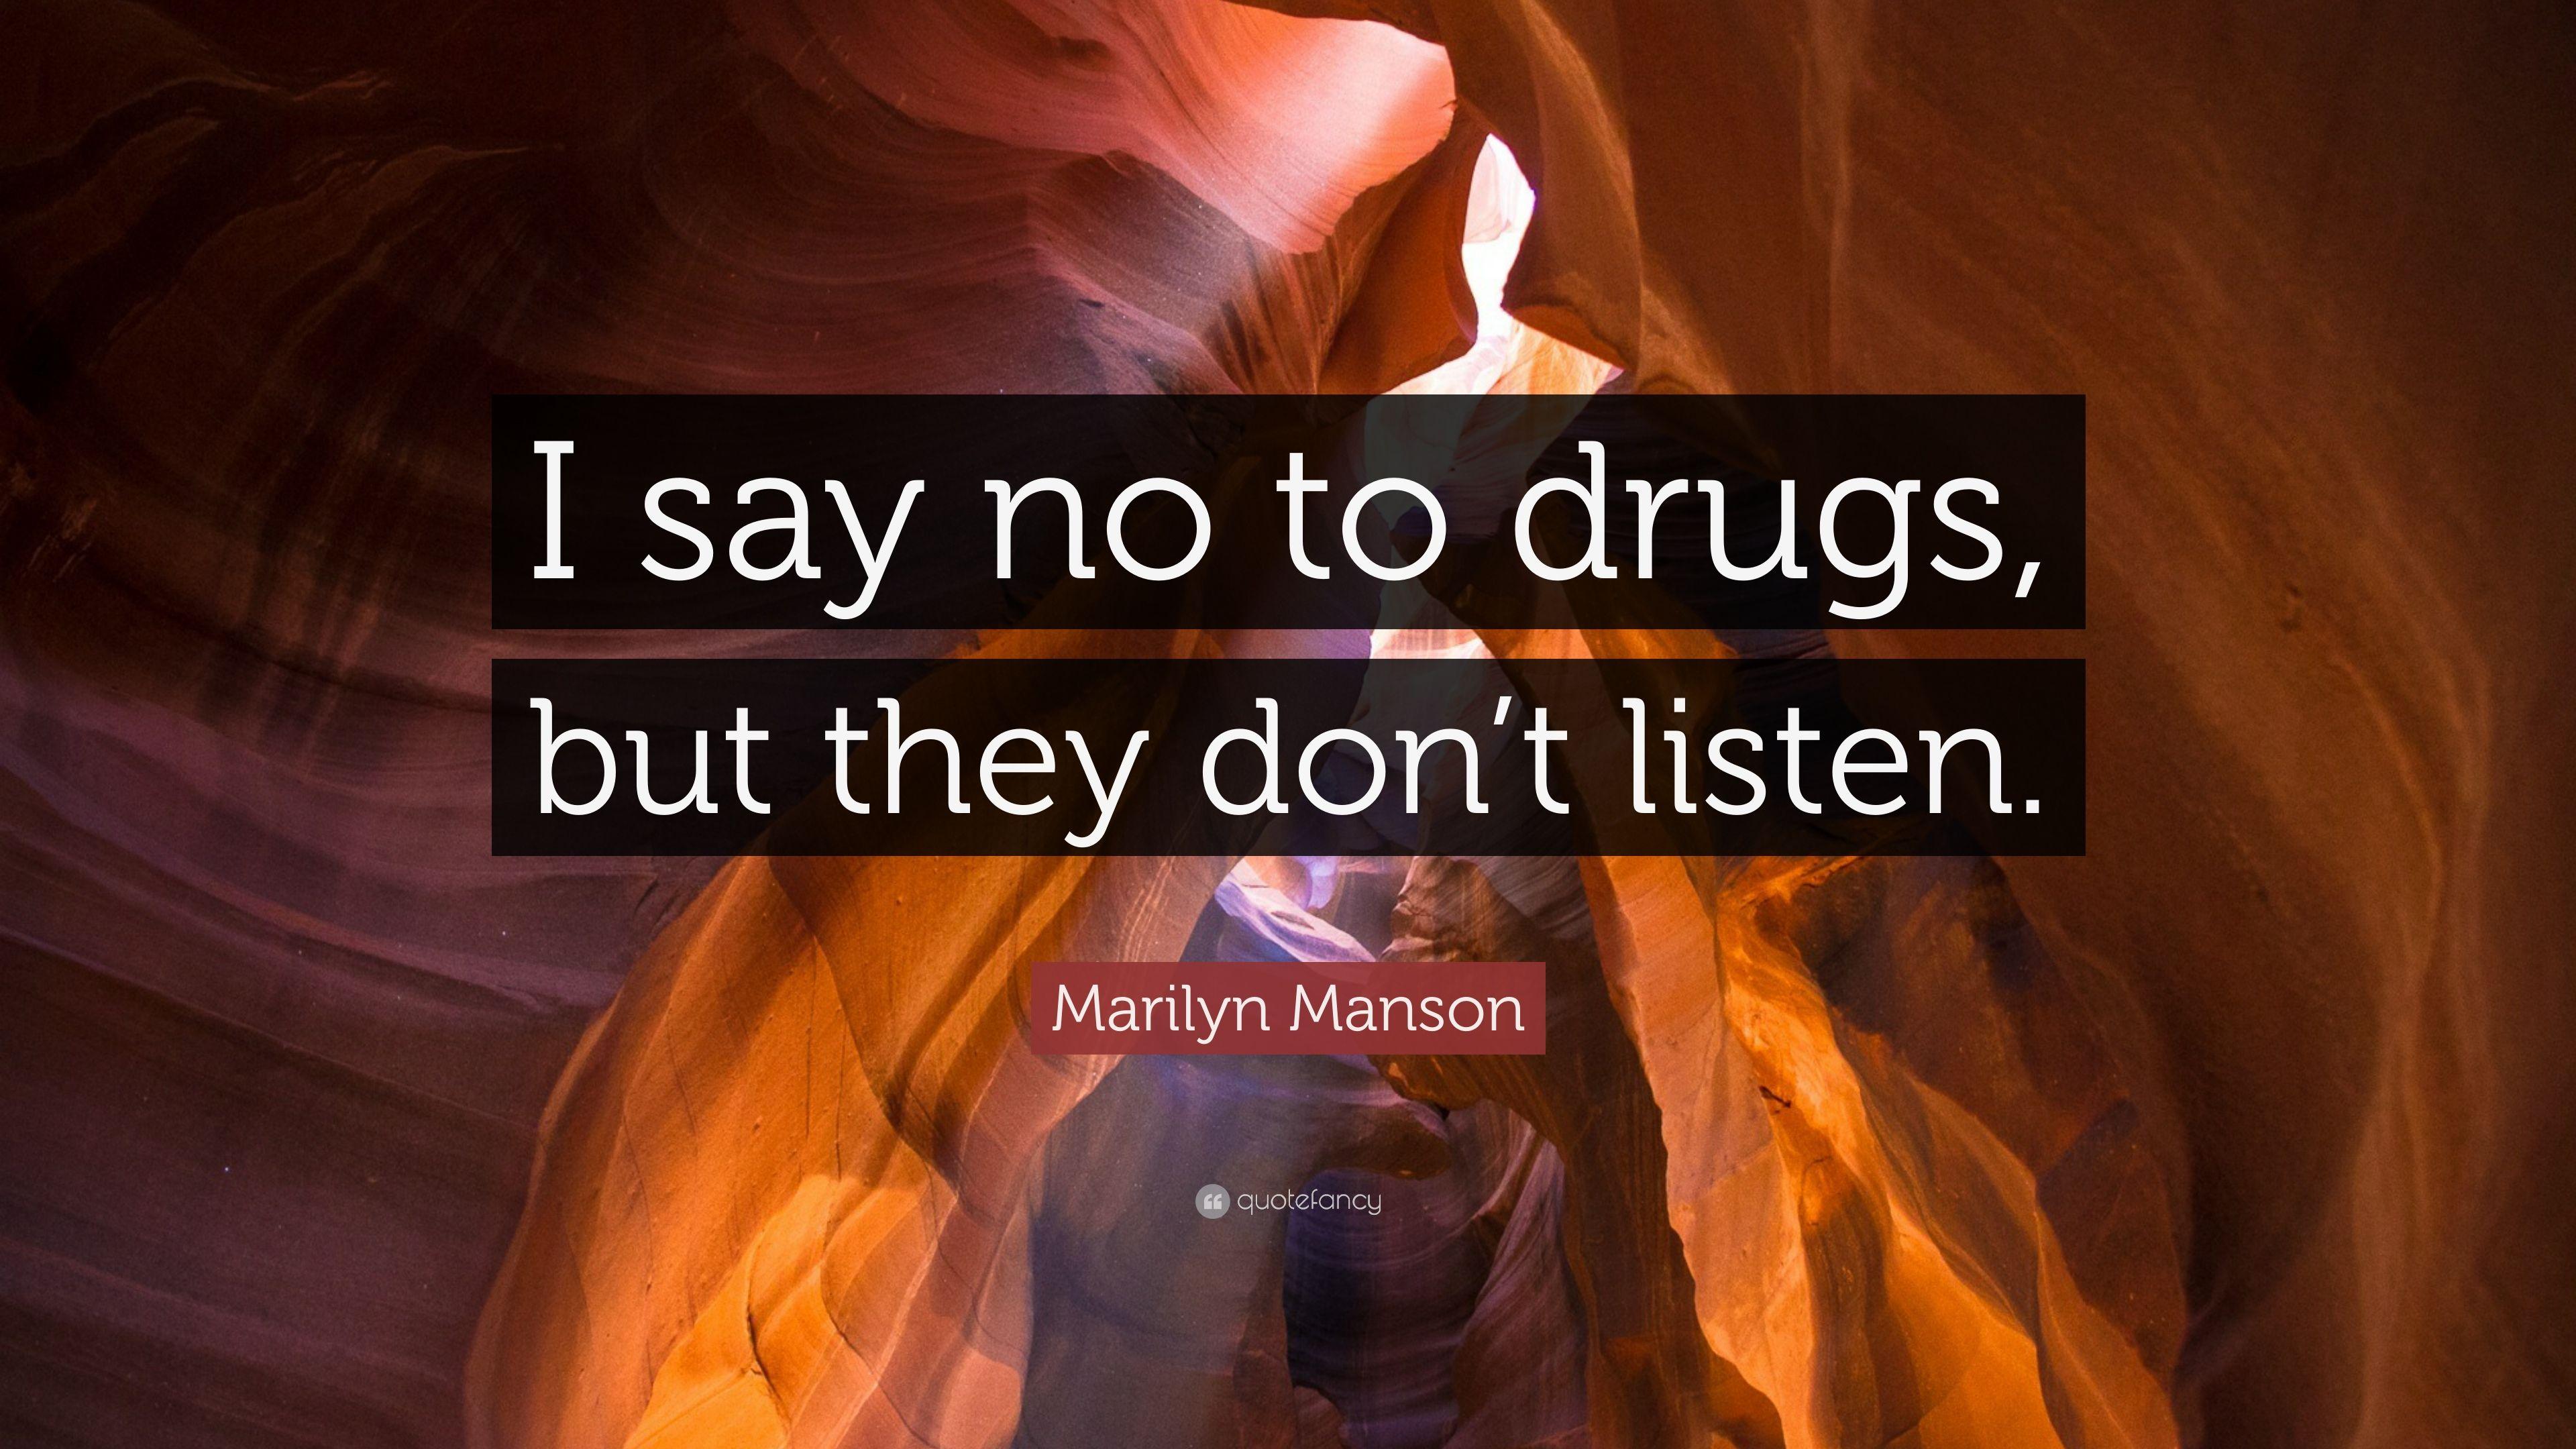 Marilyn Manson Quote: “I say no to drugs, but they don't listen.” 7